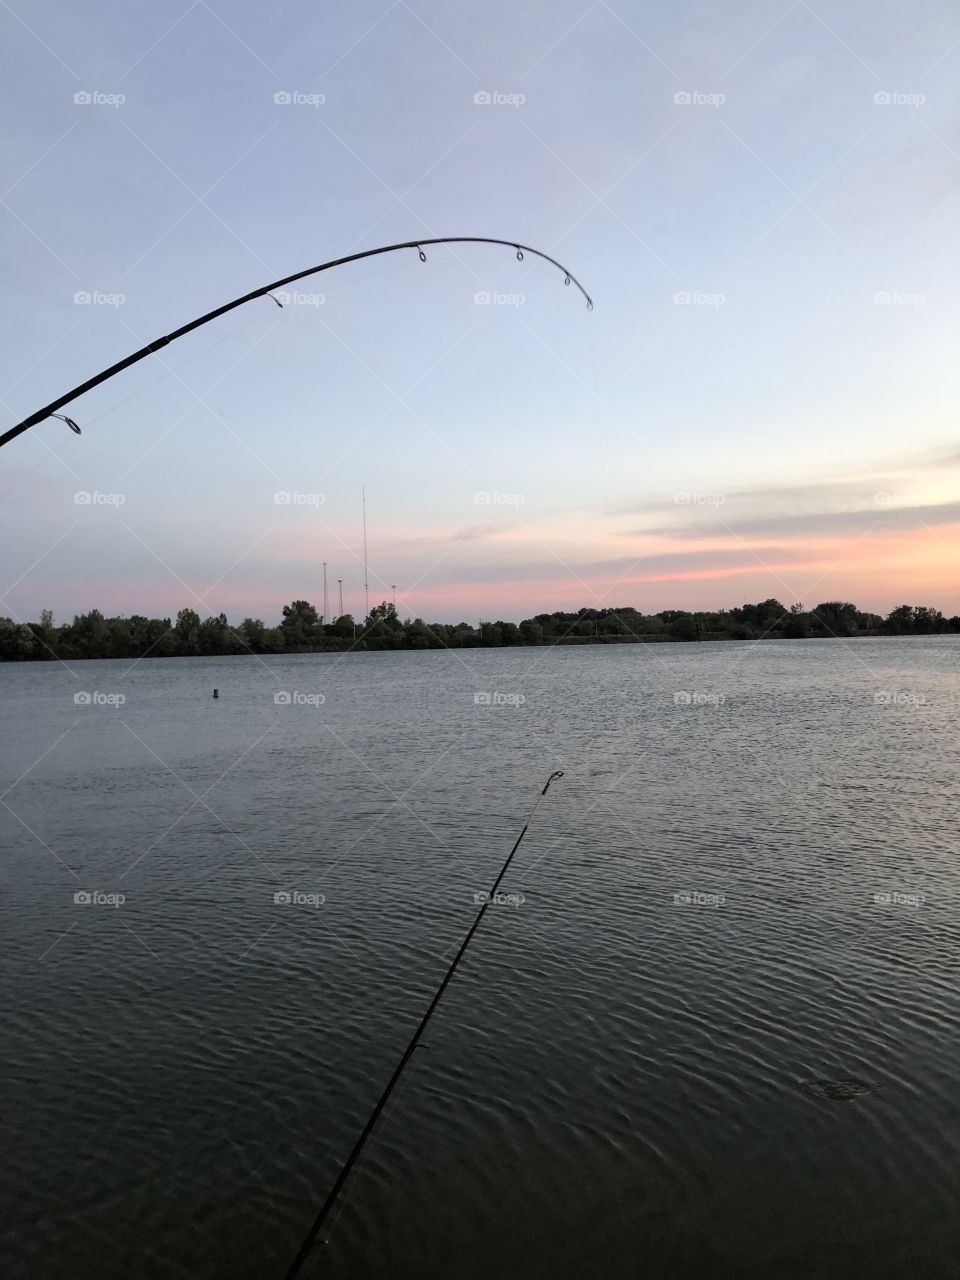 Fishing at sunset in action. 